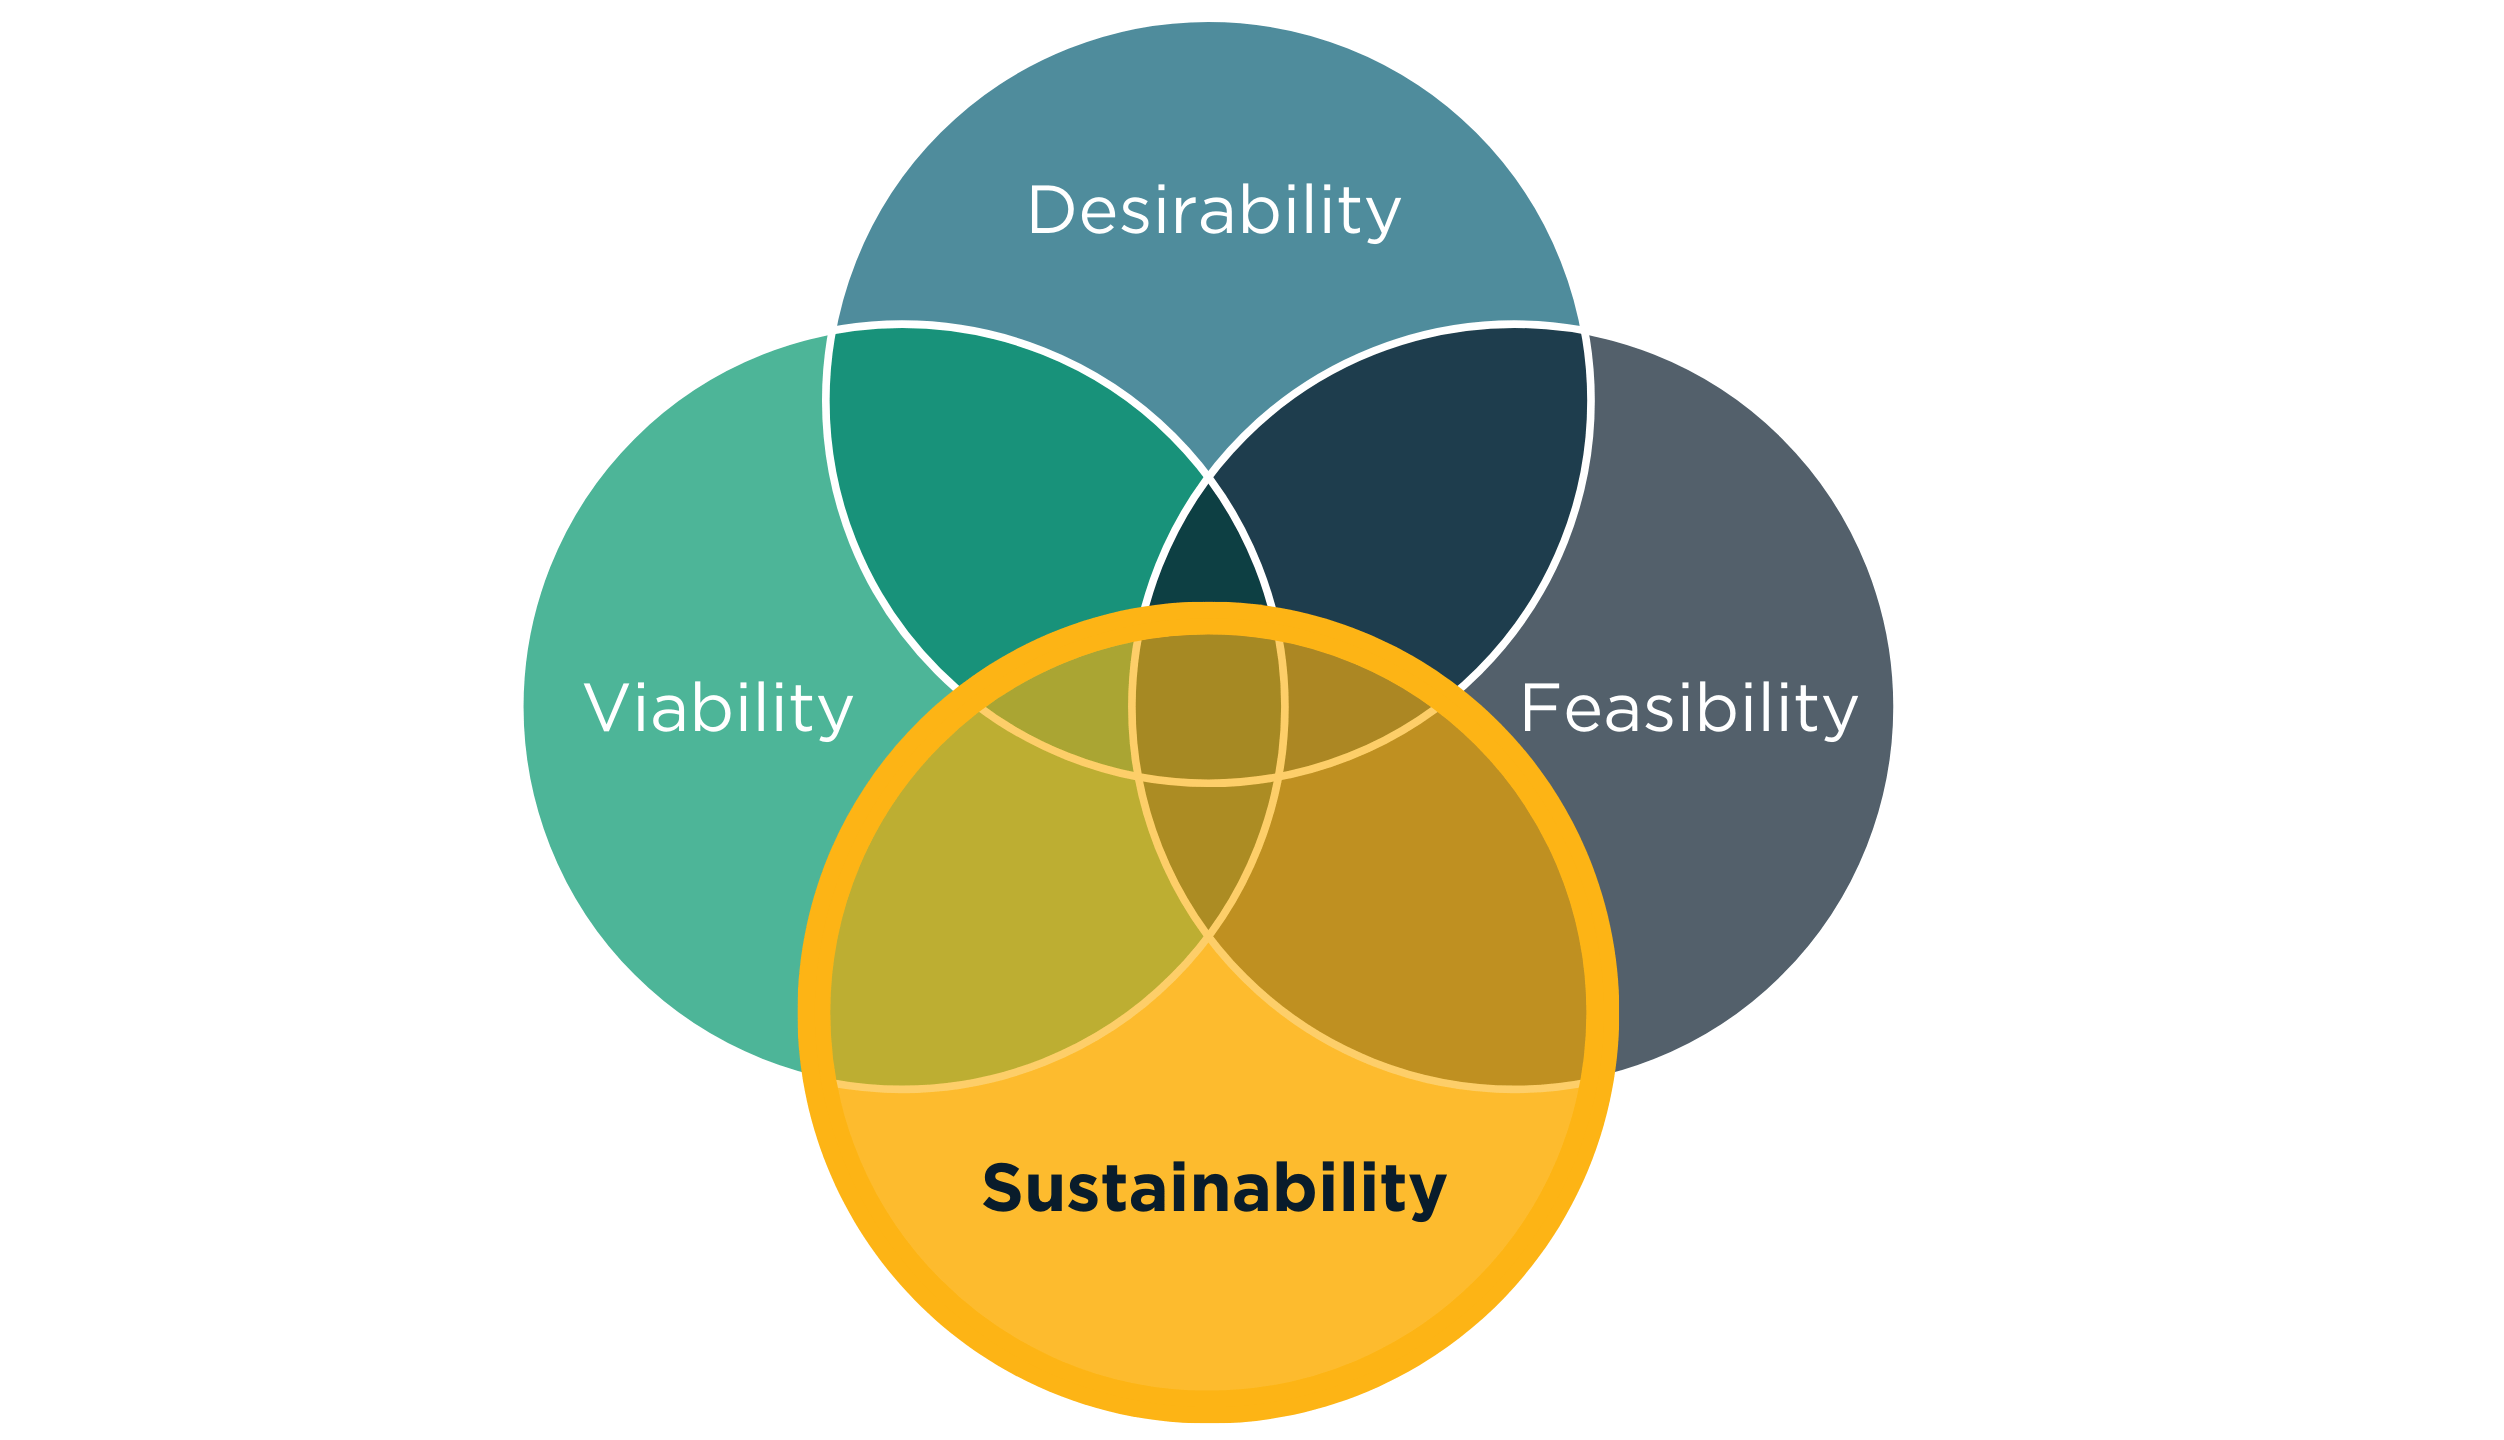 Desirability, Viability, and Feasibility